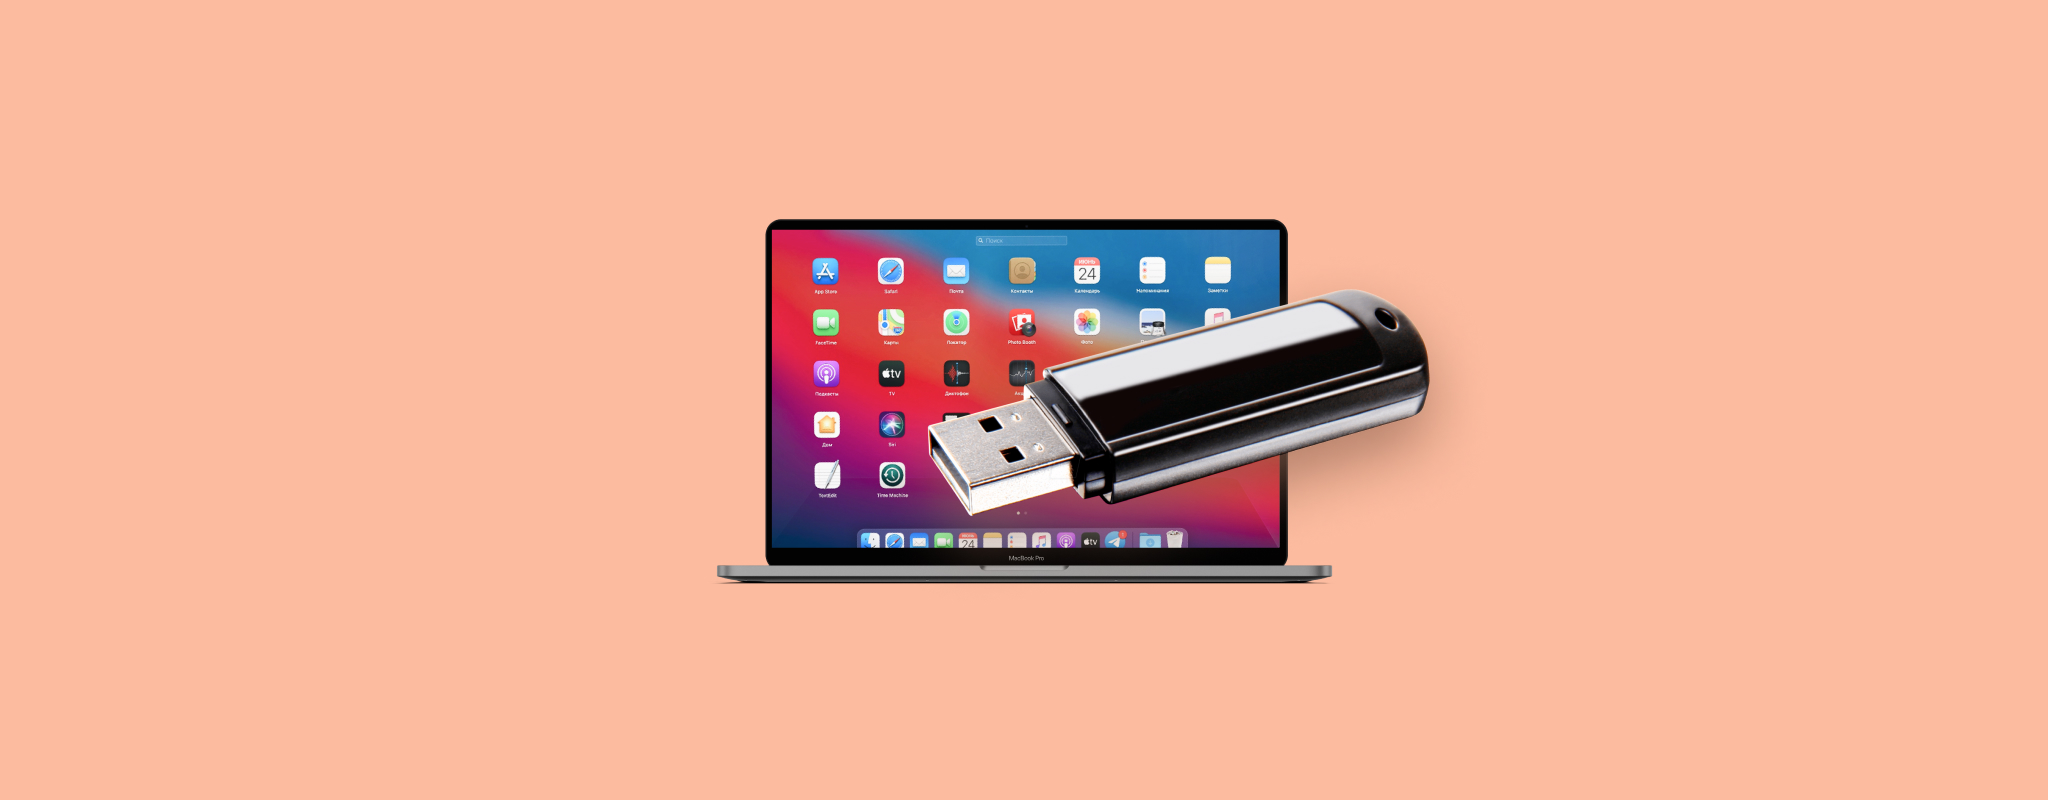 recover usb drive on mac